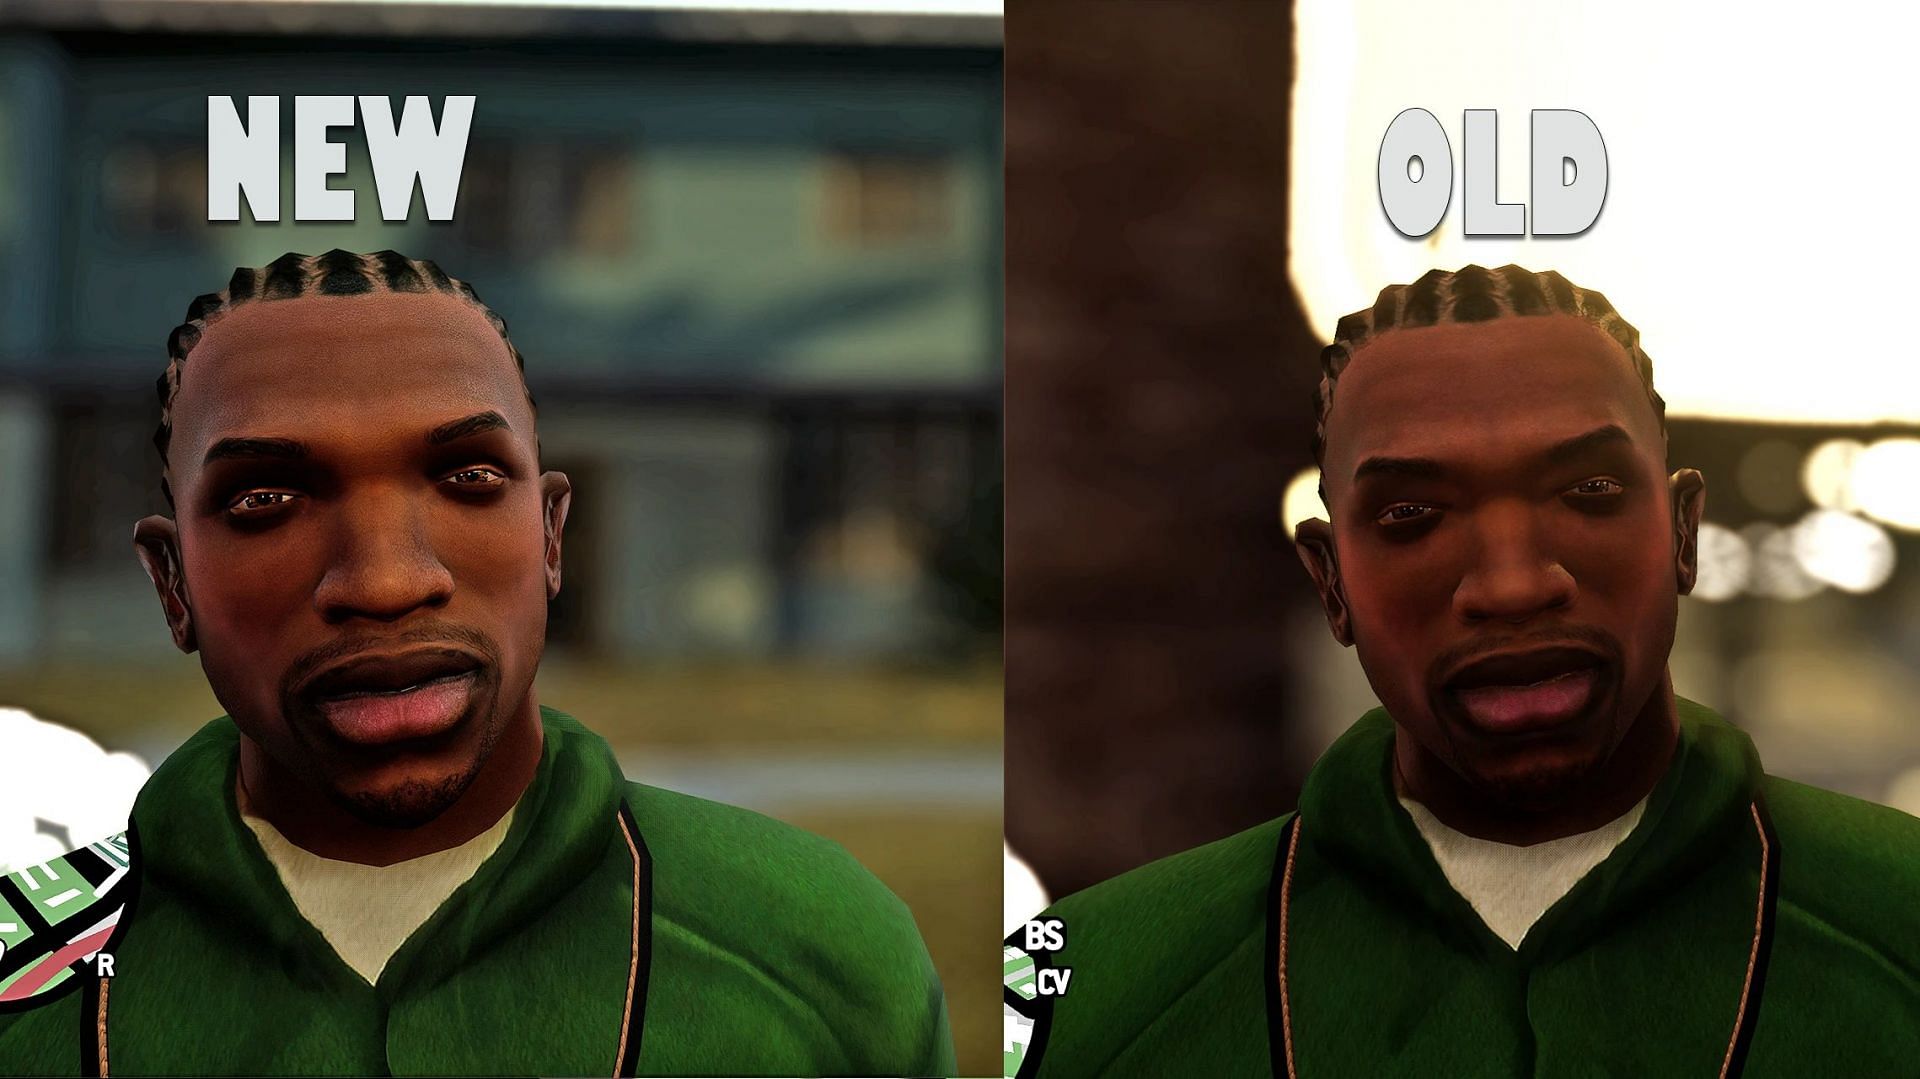 Comparison between the Definitive Edition and modded face textures (Image via nexusmods.com)